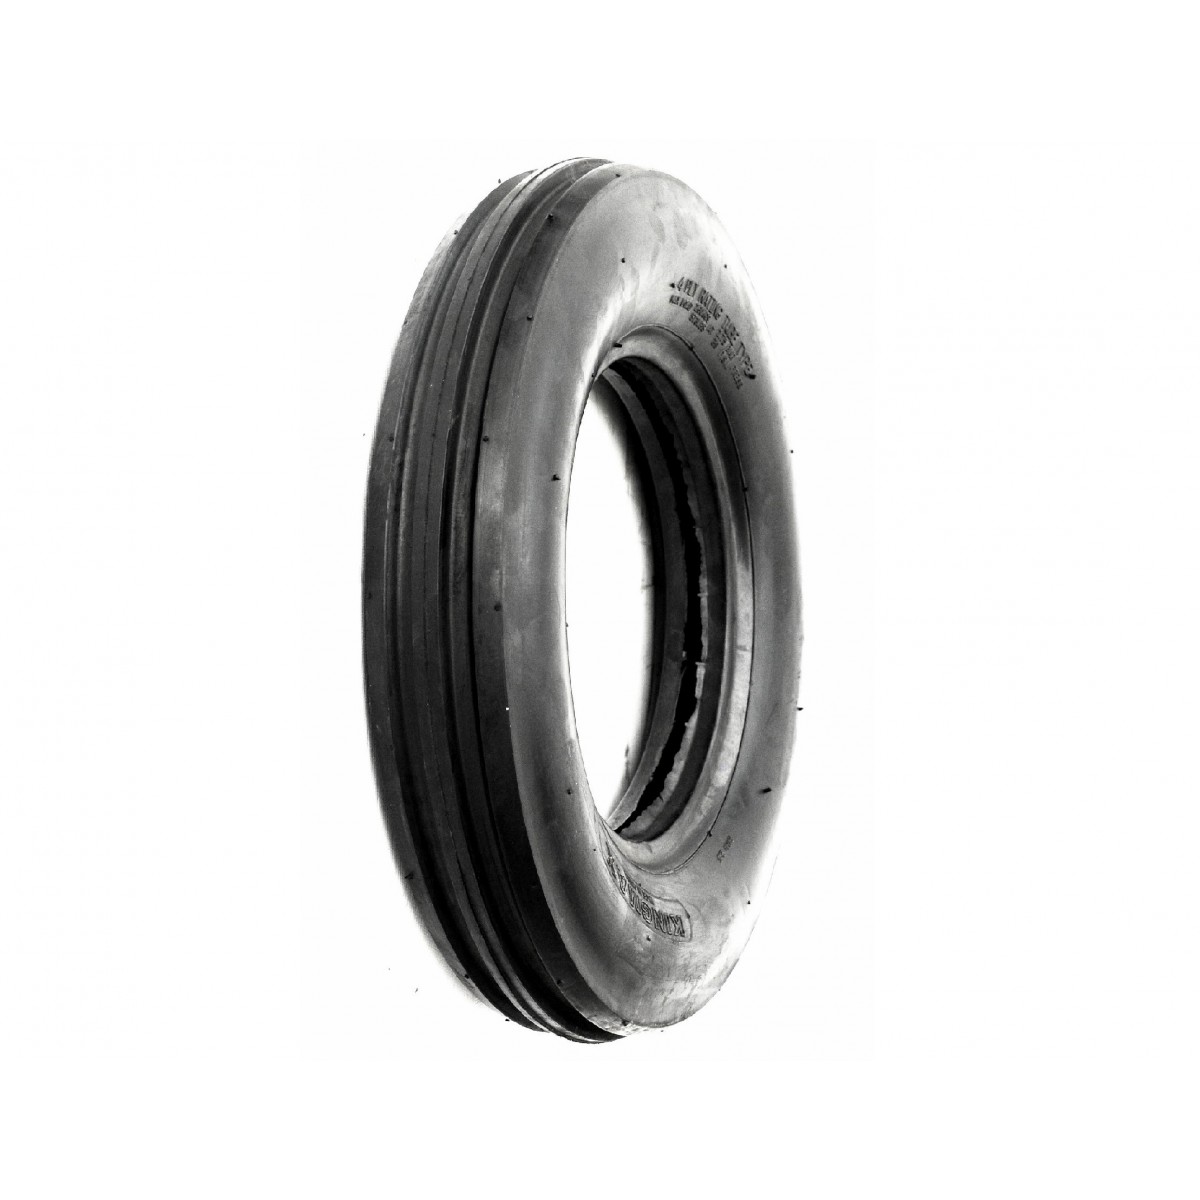 Agricultural tire 4.00-10 6PR 4-10 4x10 SMOOTH